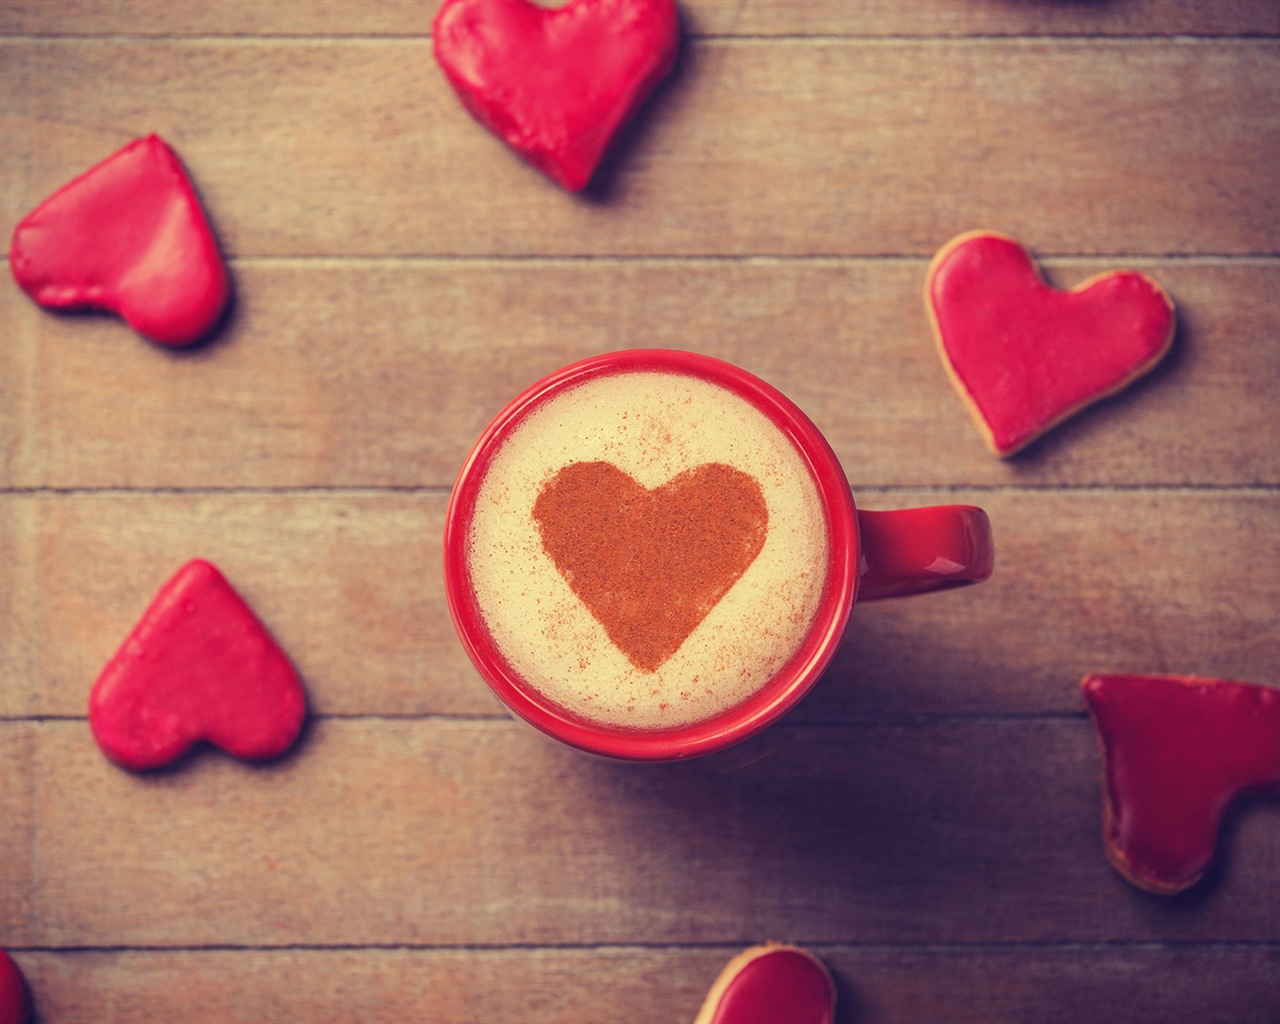 The theme of love, creative heart-shaped HD wallpapers #1 - 1280x1024